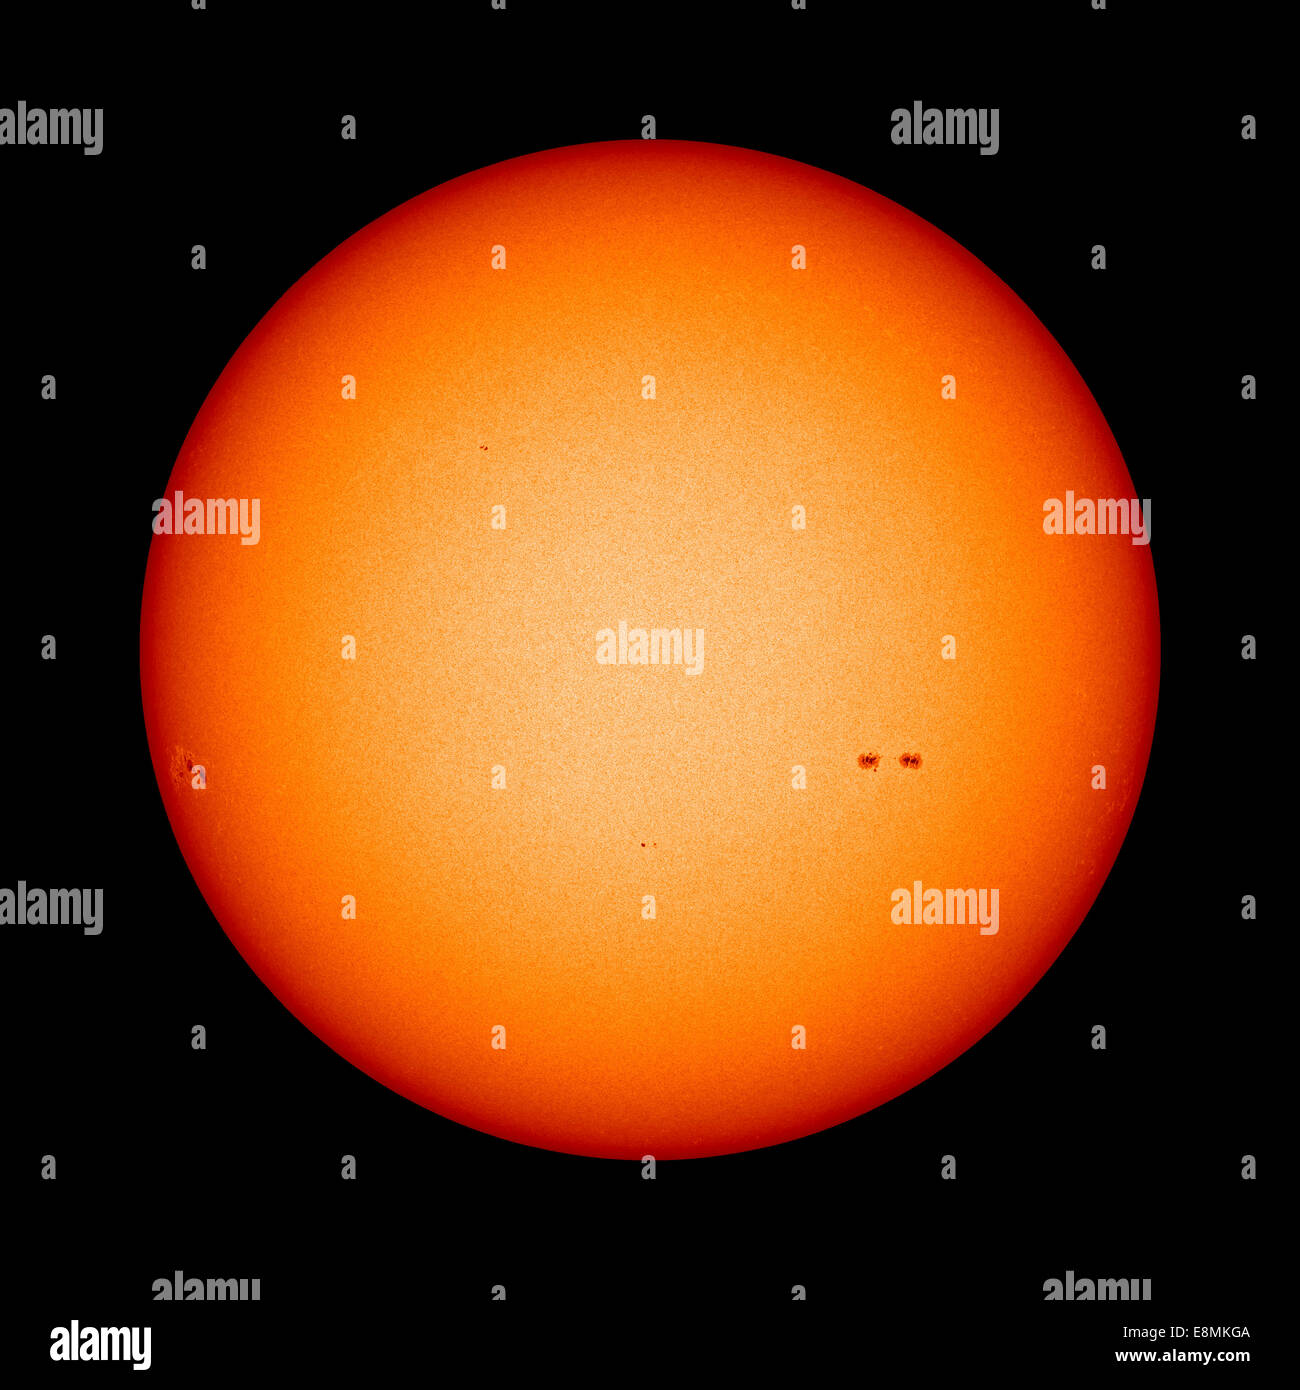 February 28, 2013 - View of the Earth-facing surface of the Sun showing just a few small sunspots. Stock Photo